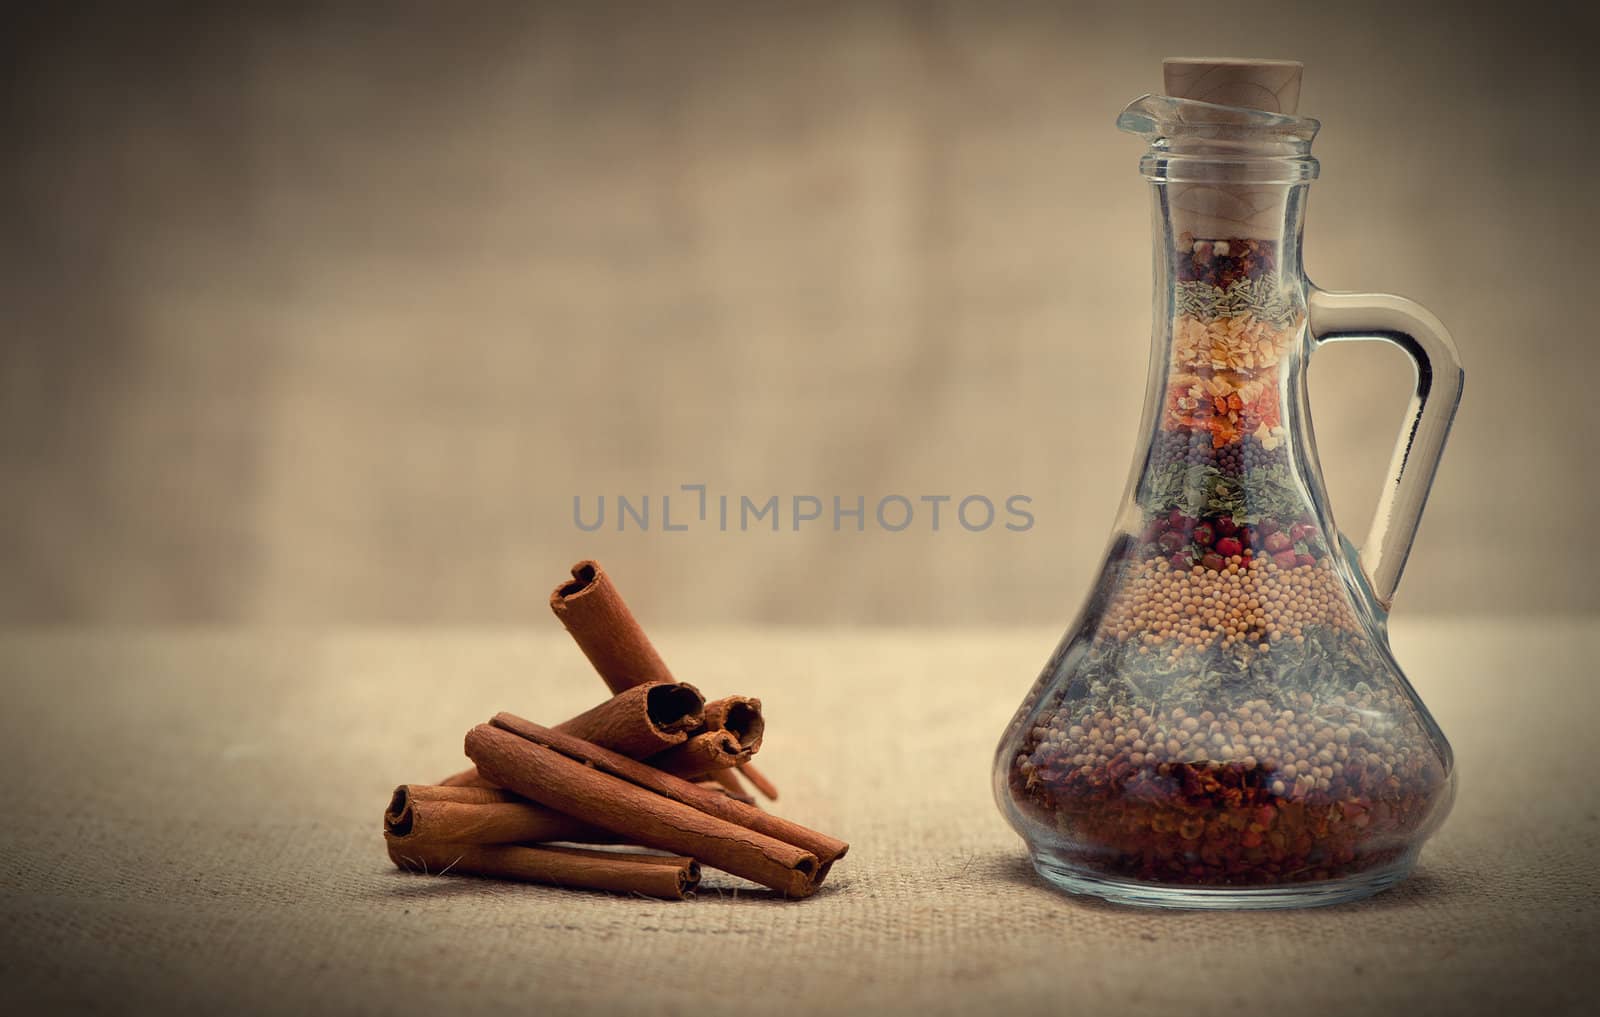 Bottle of spices and cinnamon. Capacity with a set of various spices and cinnamon on a rough background